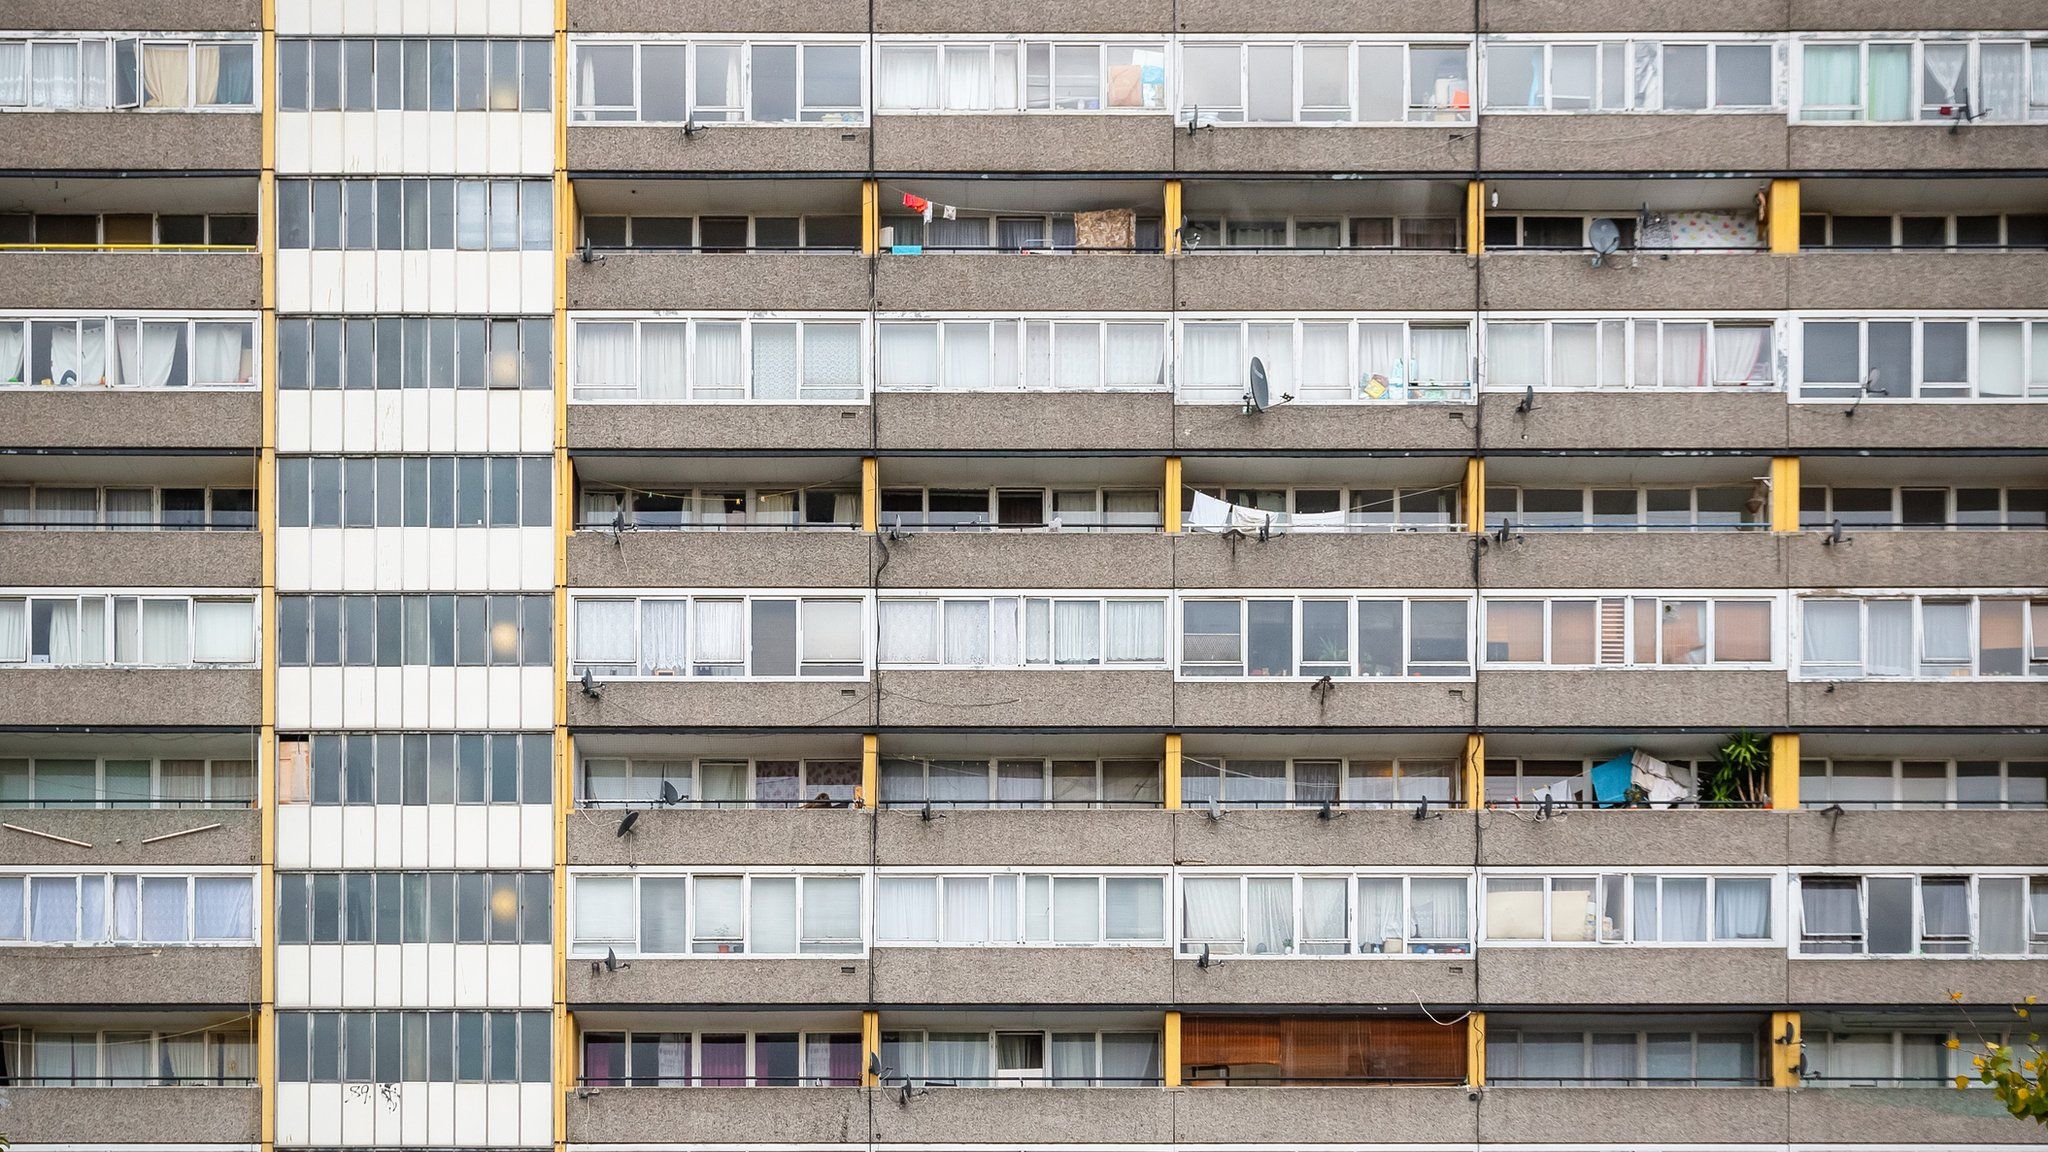 File photo of council flats on Walworth estate in south-east London.